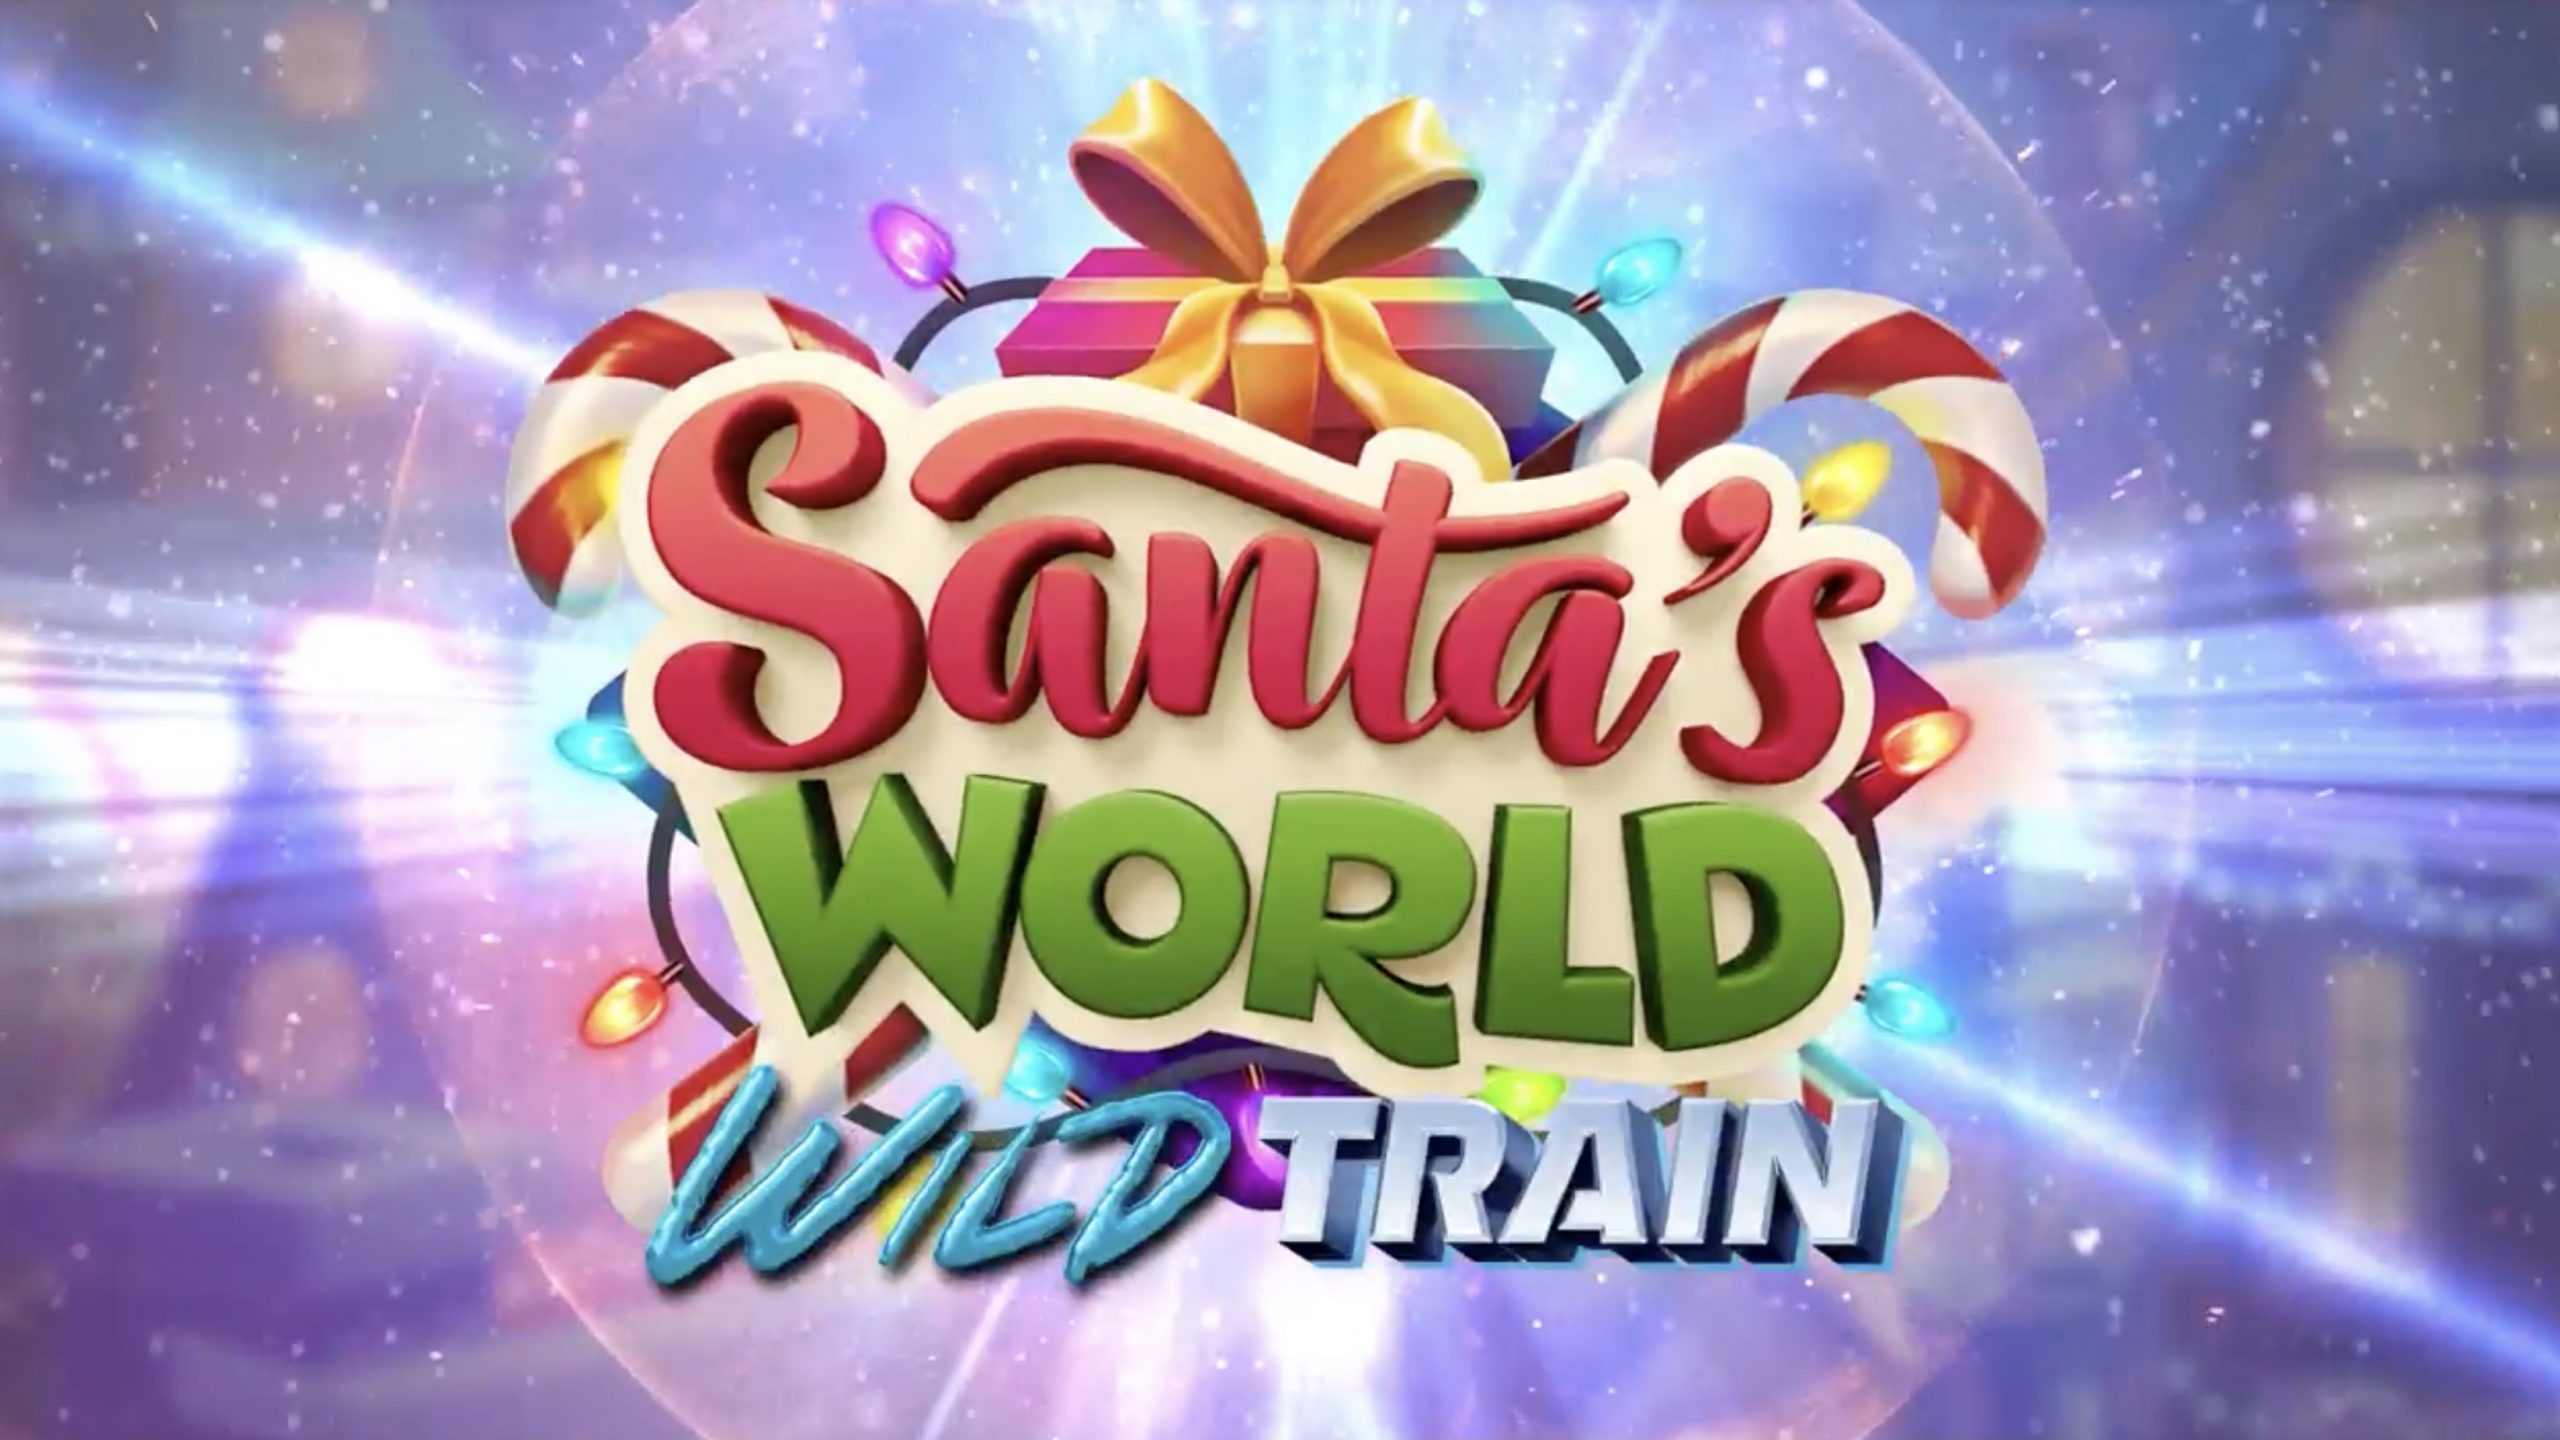 Santa’s World is a 5x5, 25-payline video slot that comes with a maximum win potential of up to x4,610 the bet.